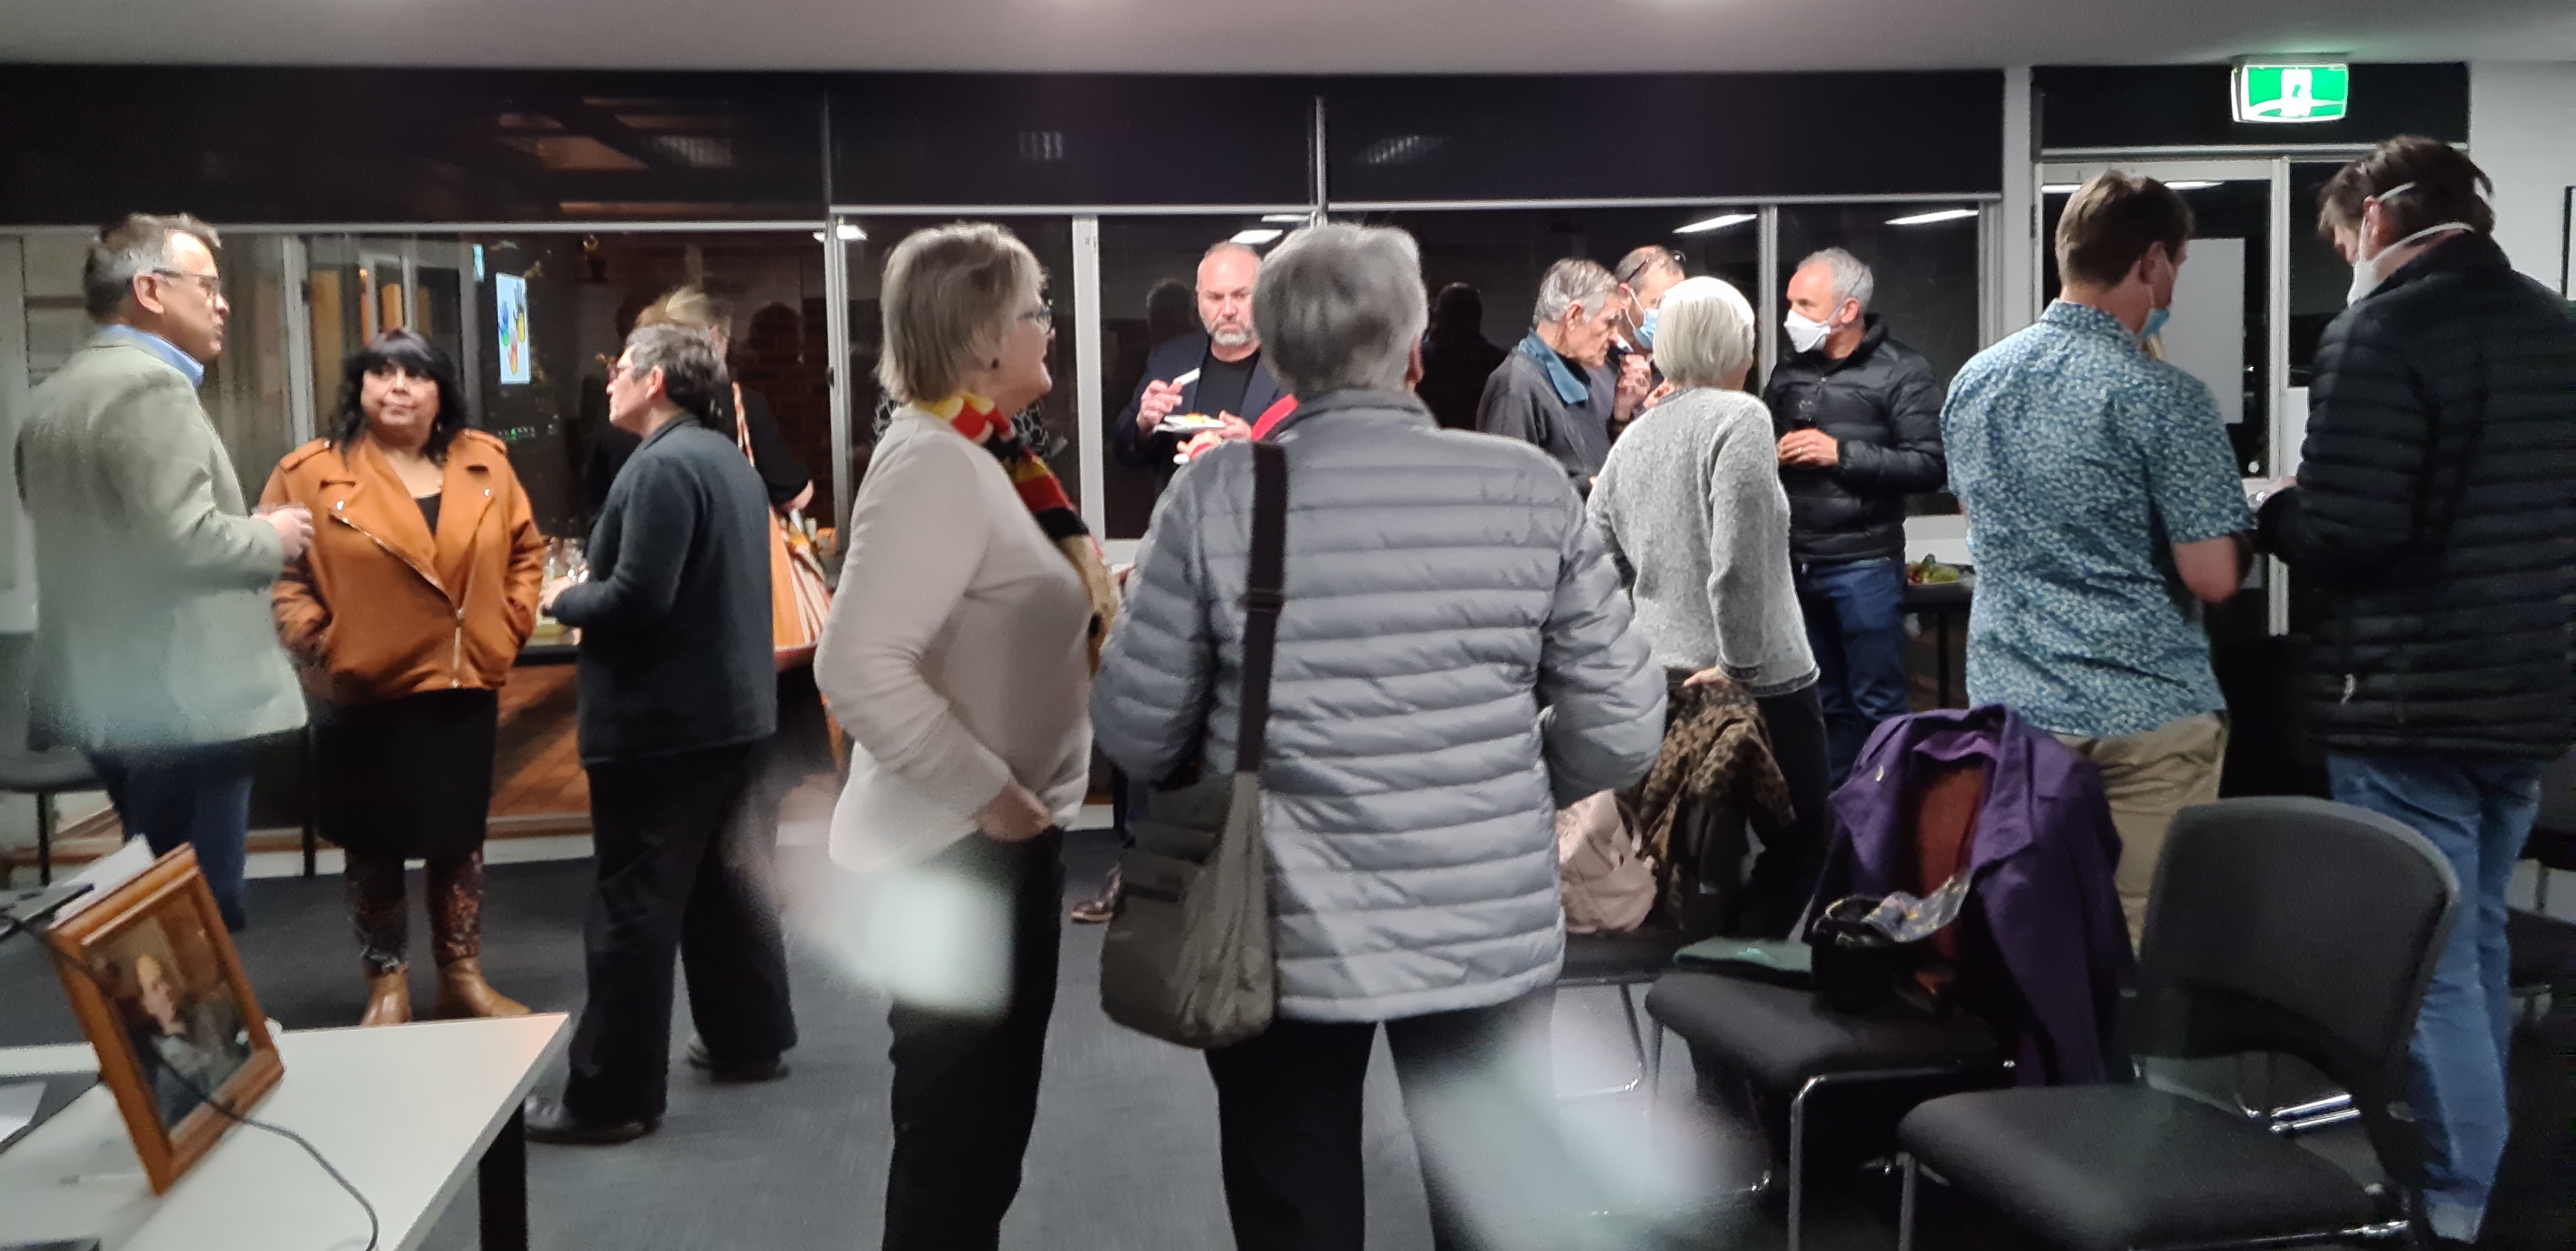 Gathering of people after lecture - Chris Bourke on left, Cheryl Axleby second left